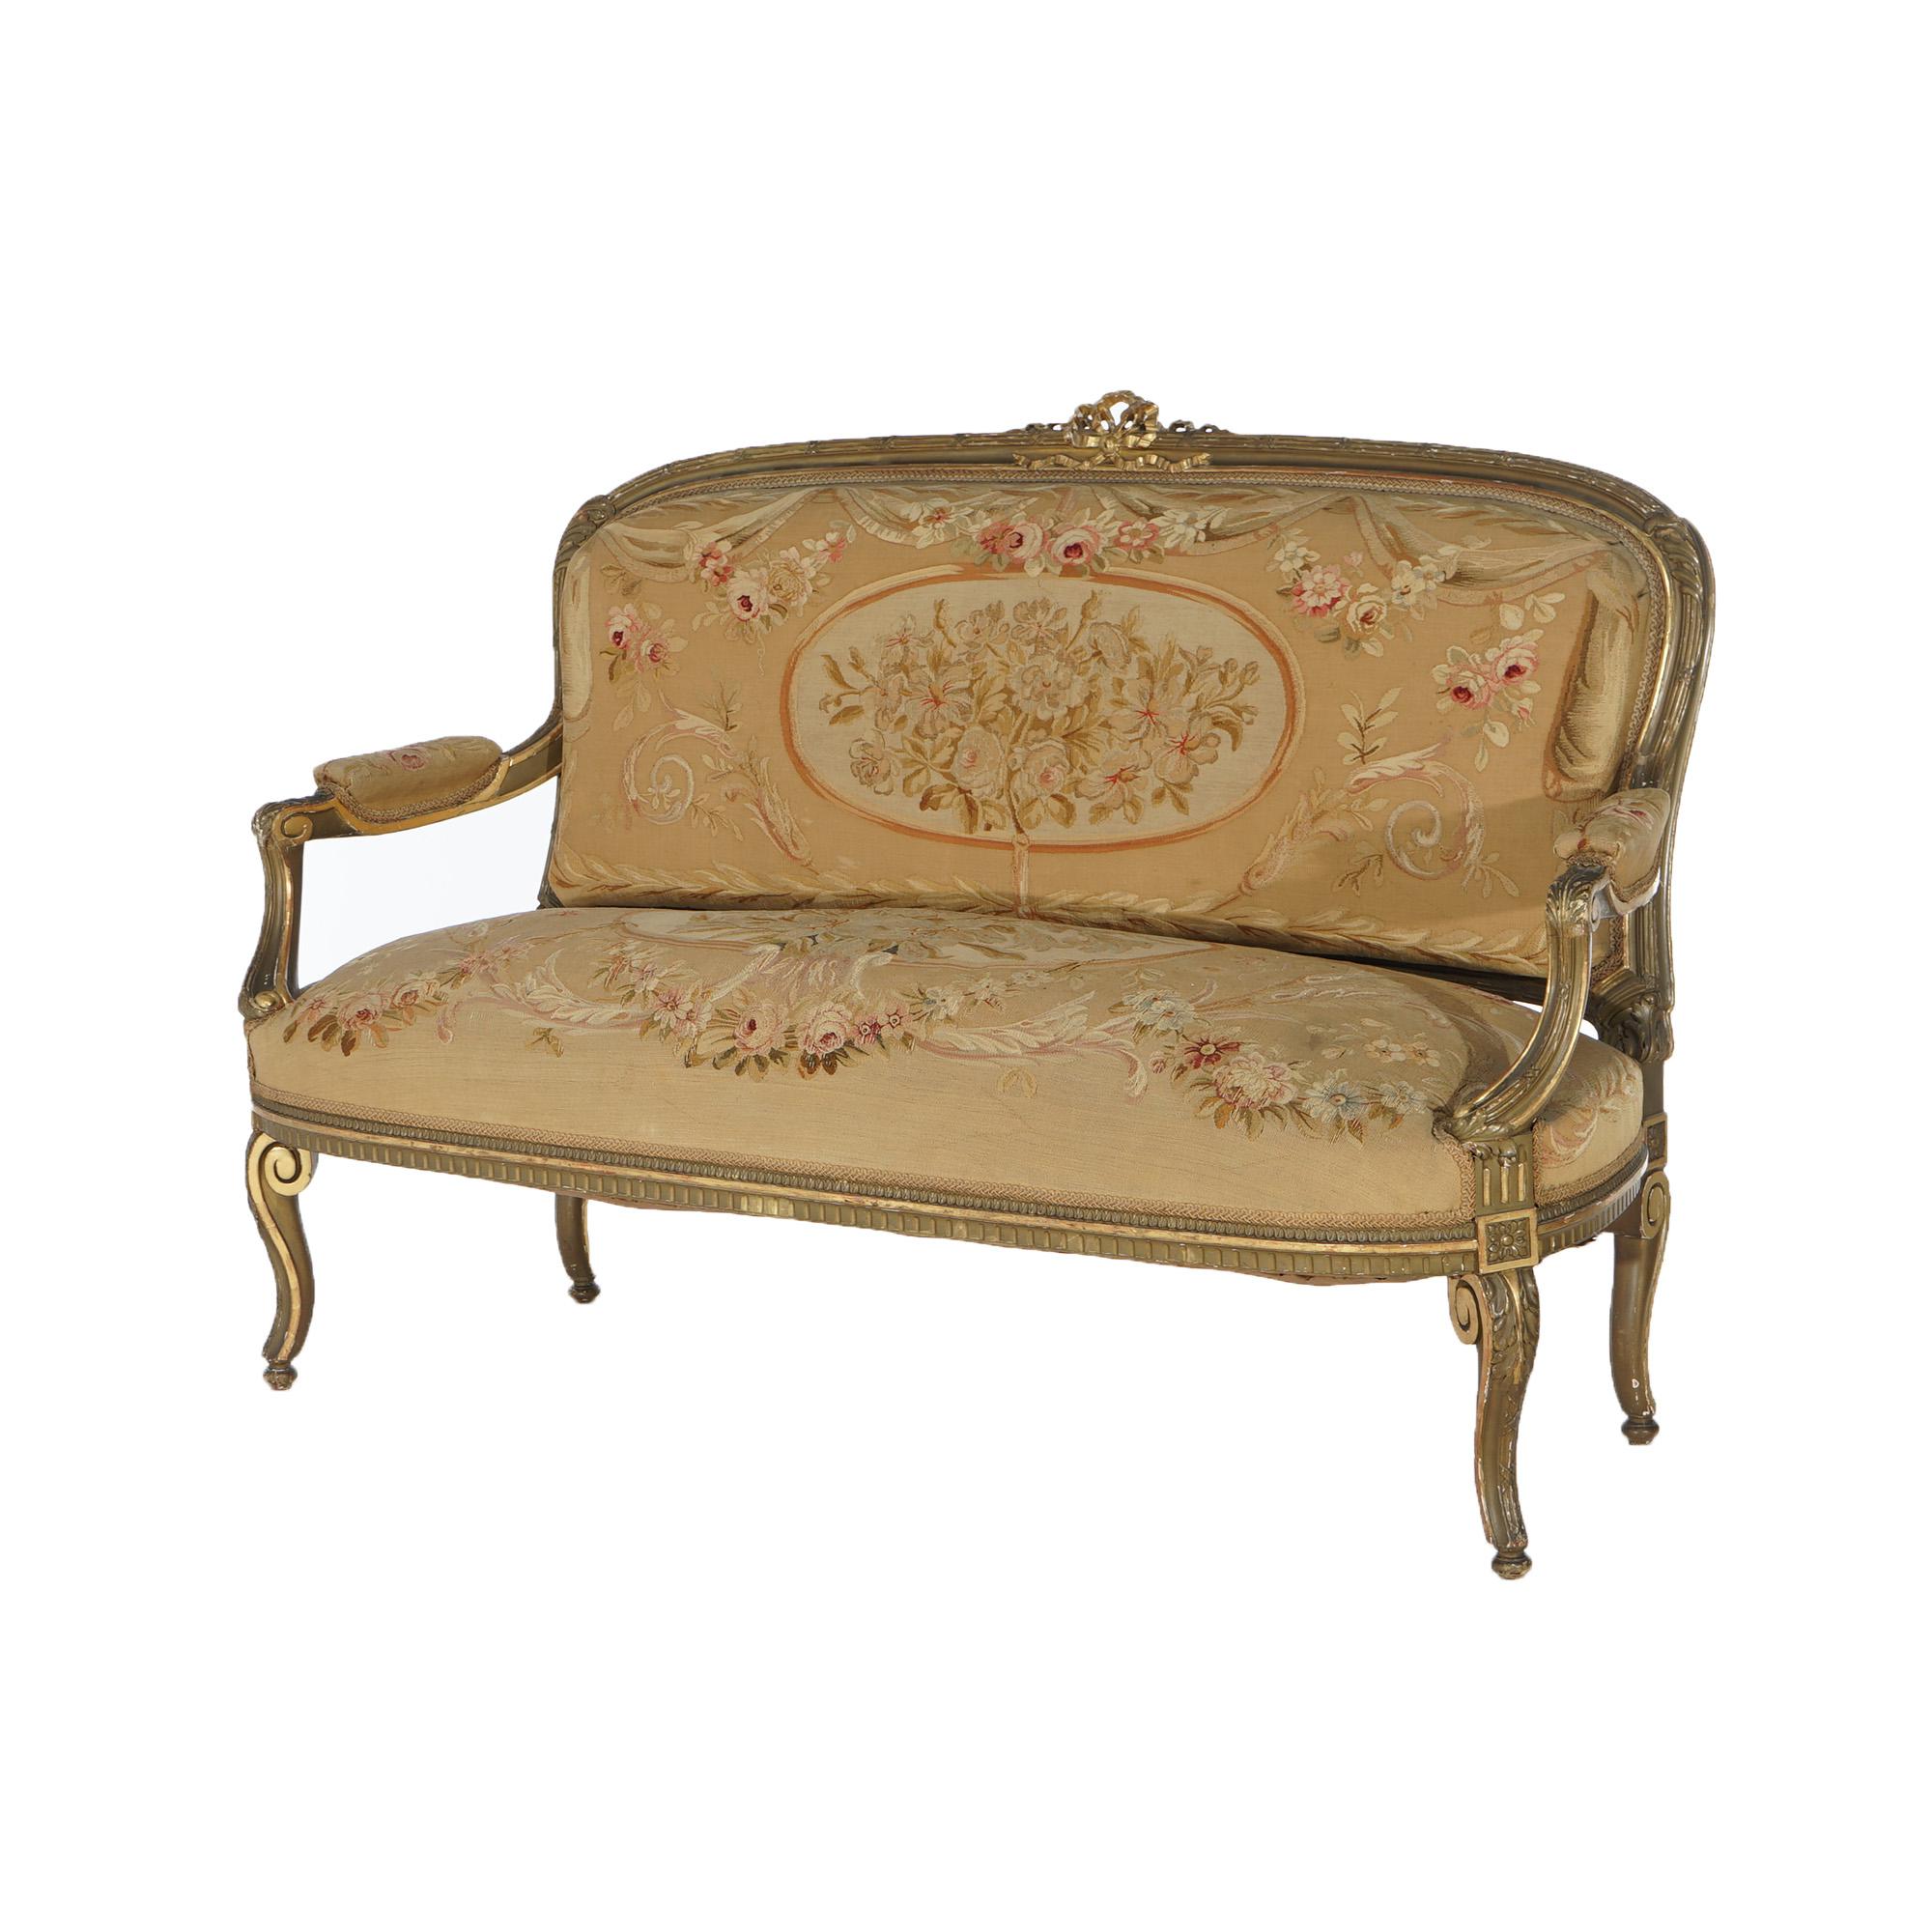 Antique French Louis XV Giltwood & Aubusson Tapestry Sofa C1860 For Sale 1